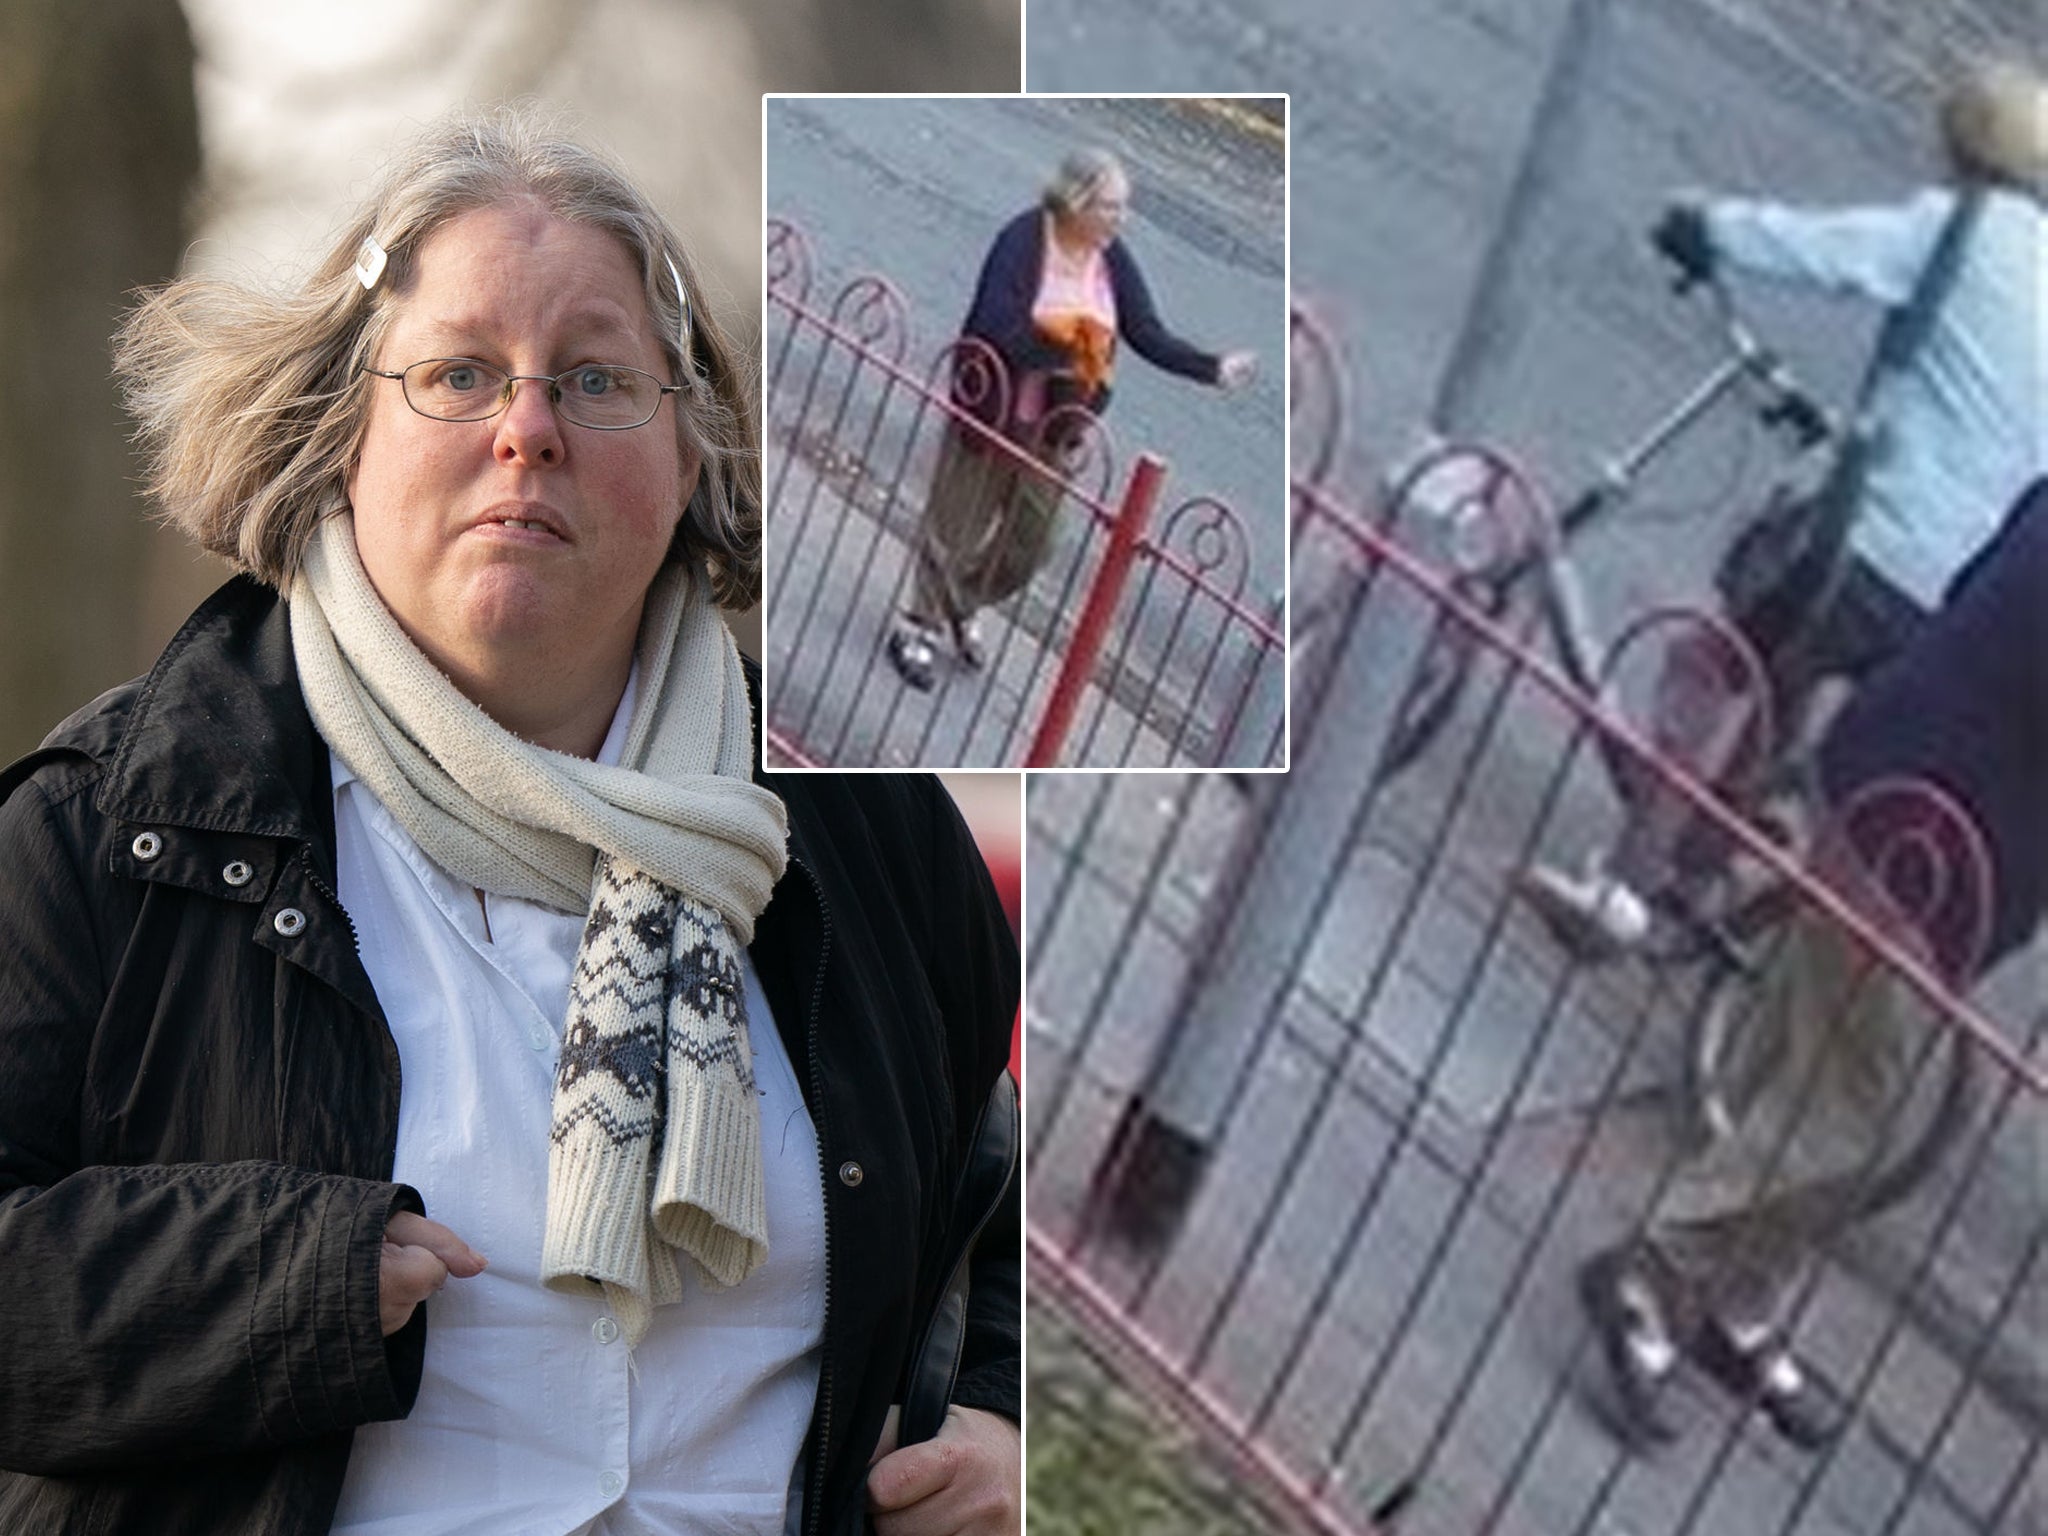 Auriol Grey, 49, shouted at retired midwife Celia Ward to “get off the f****** pavement”